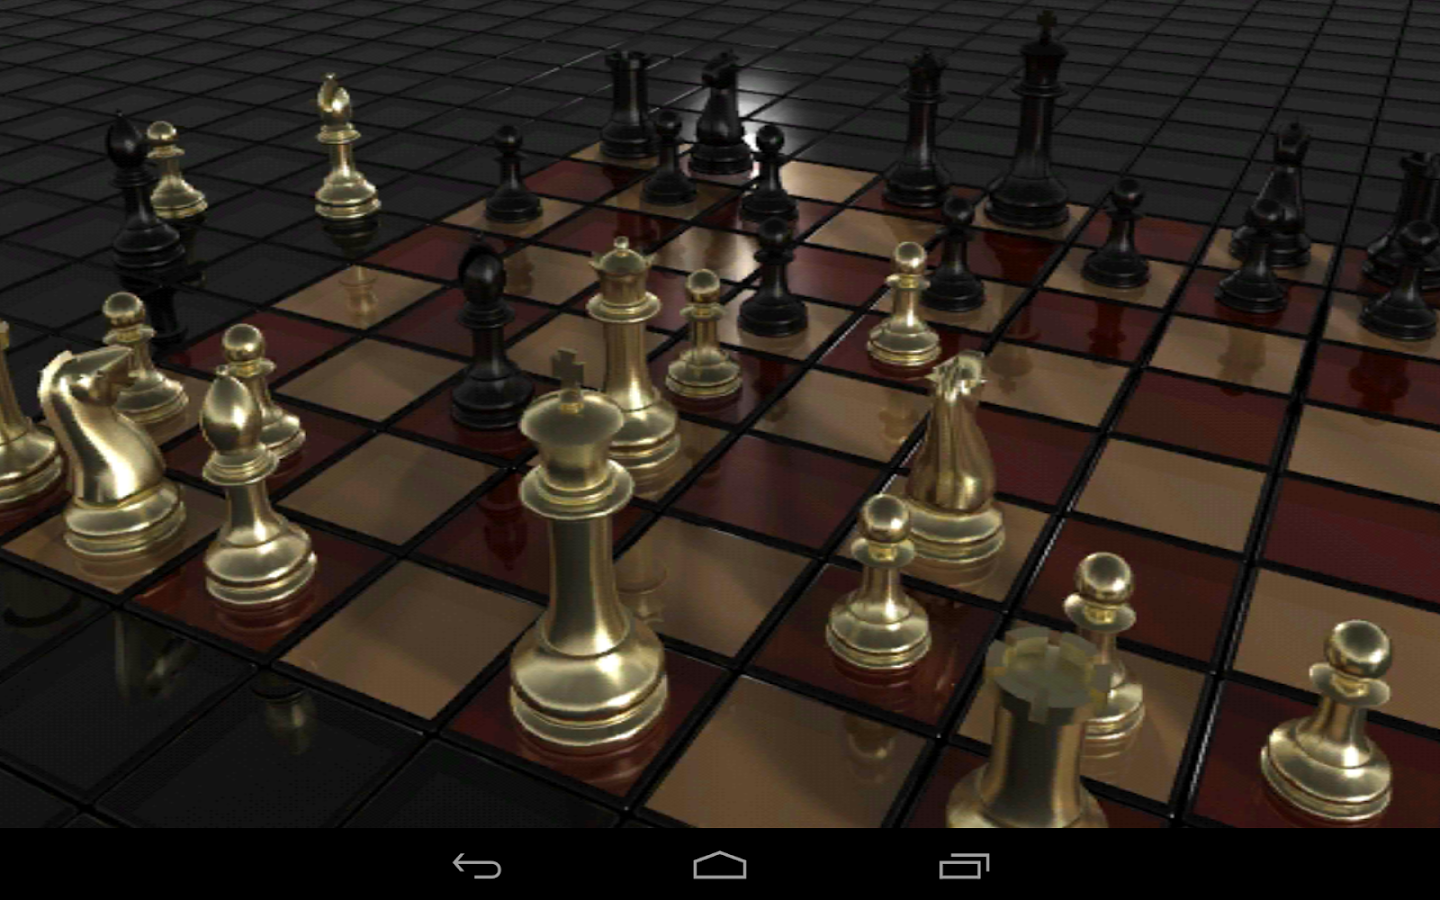 https://static.download-vn.com/com.atrilliongames.chessgame7.png